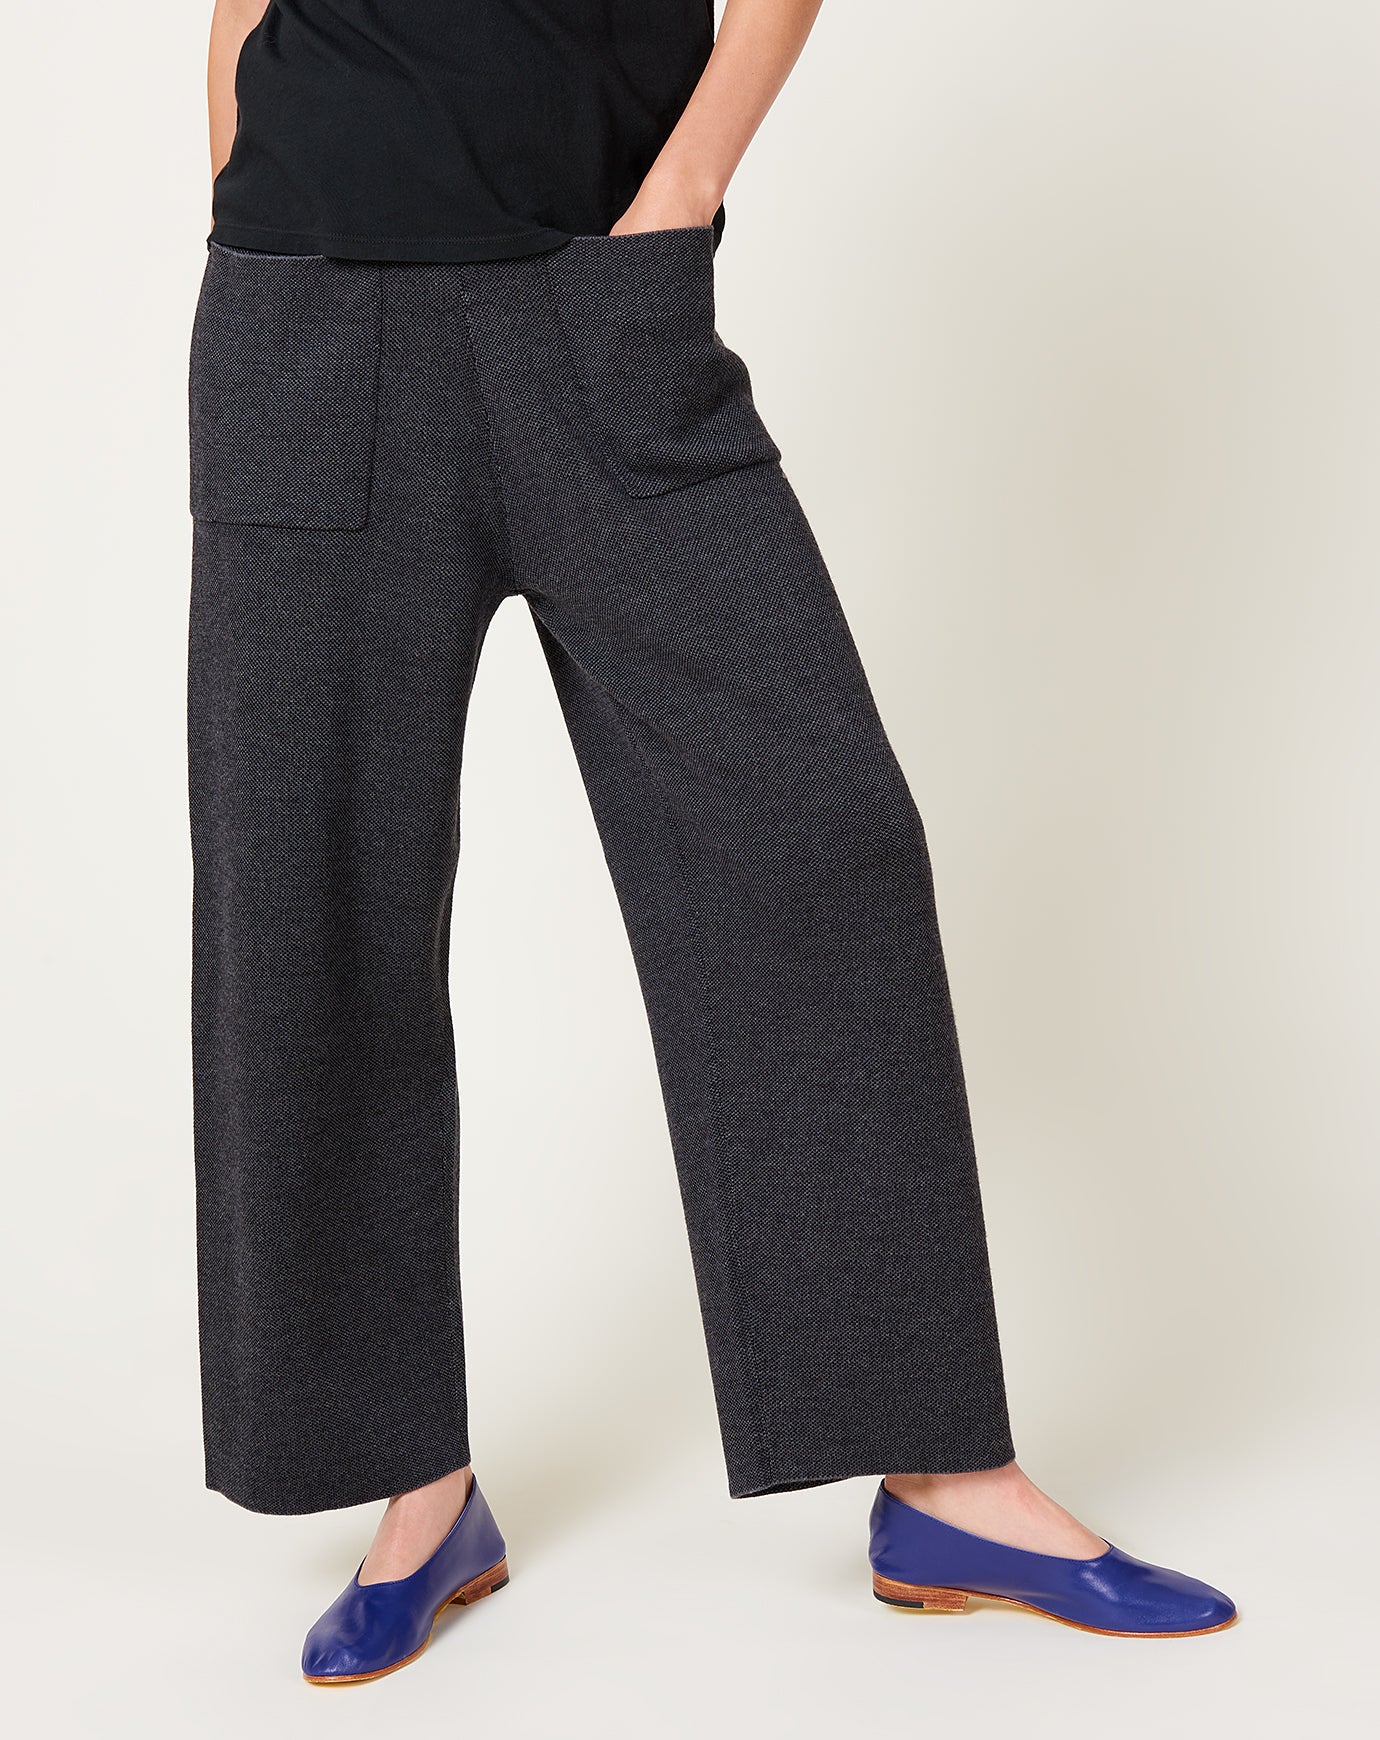 6397 Double Knit Pant in Black and Grey